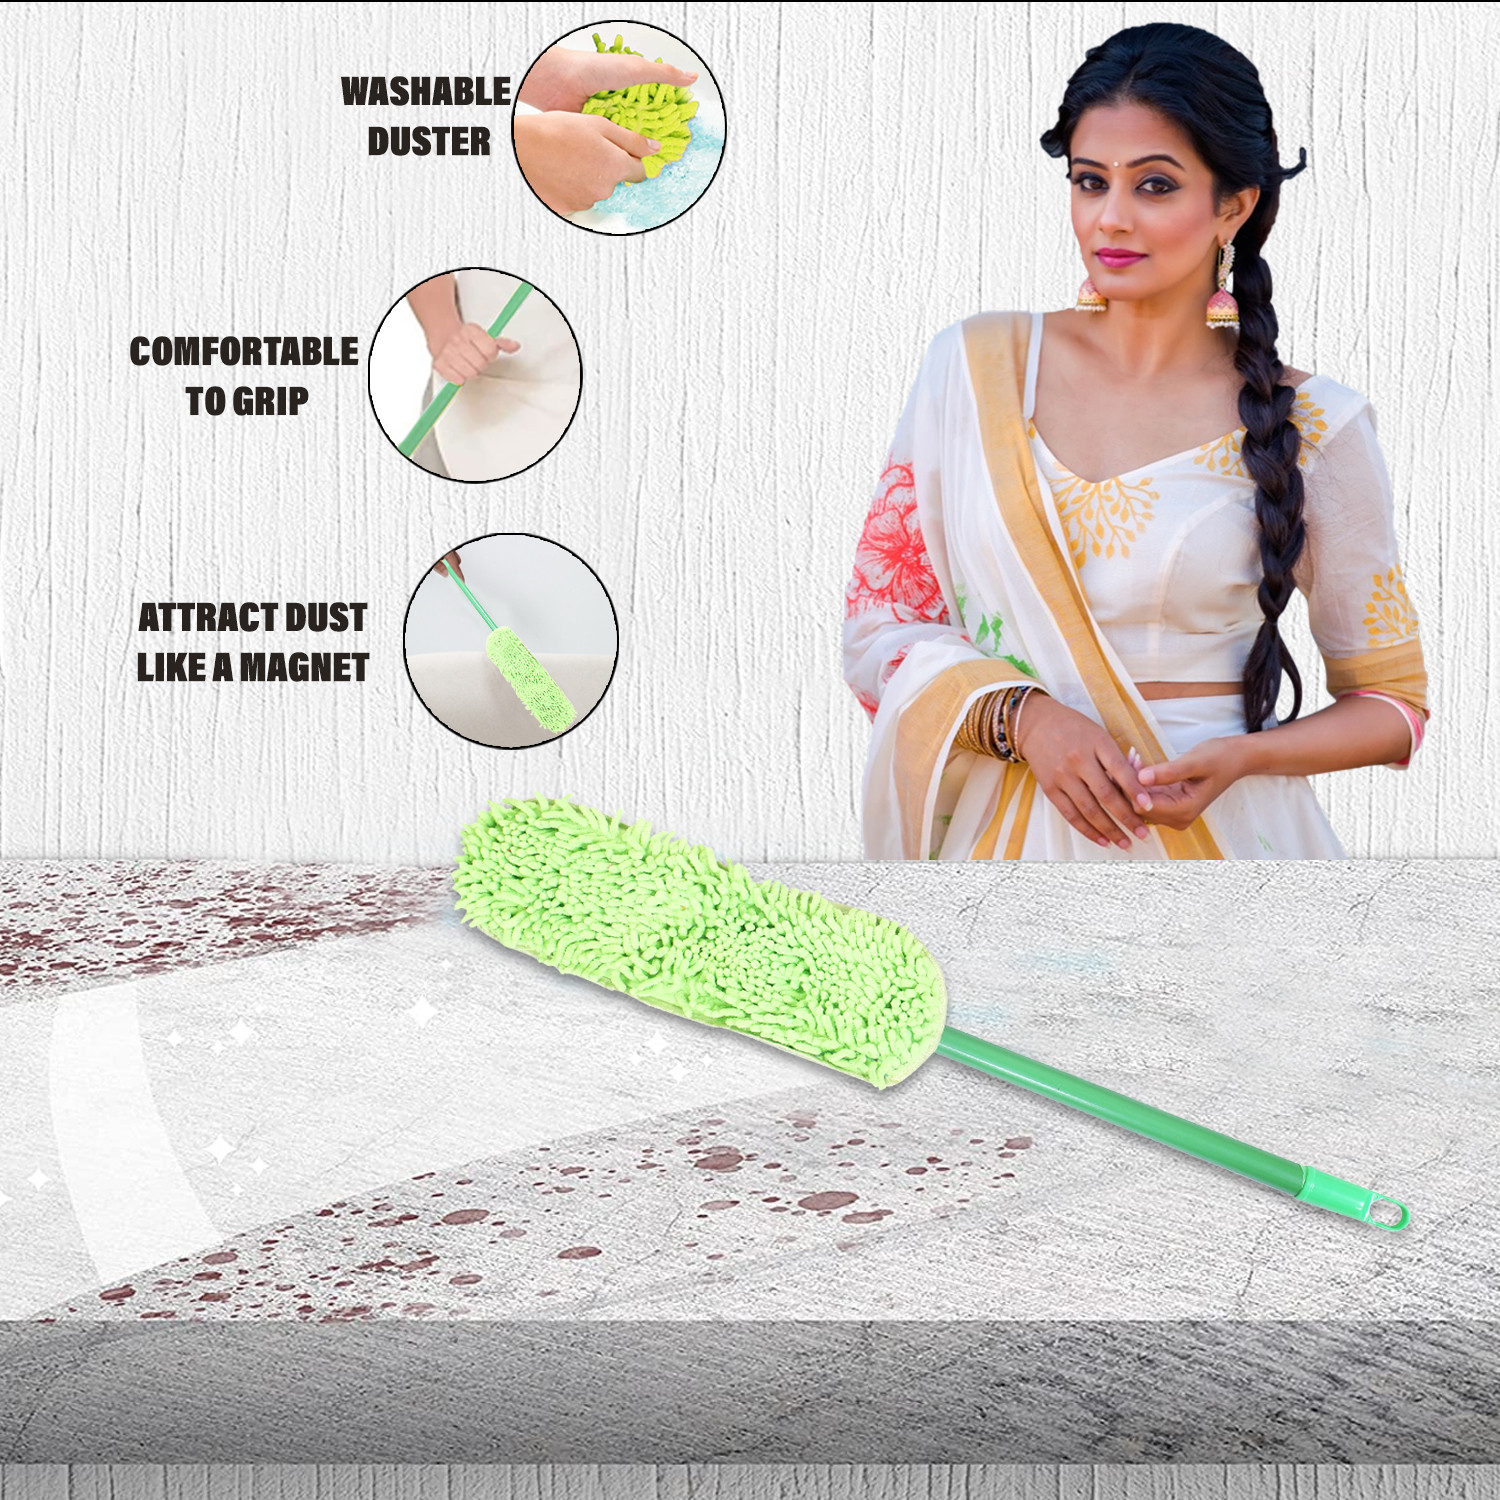 Kuber Industries Hand Duster|Microfiber Washable Cleaning Brush|Stainless Steel Detachable Handle Dusting Brush For Car|House Cleaning (Green)